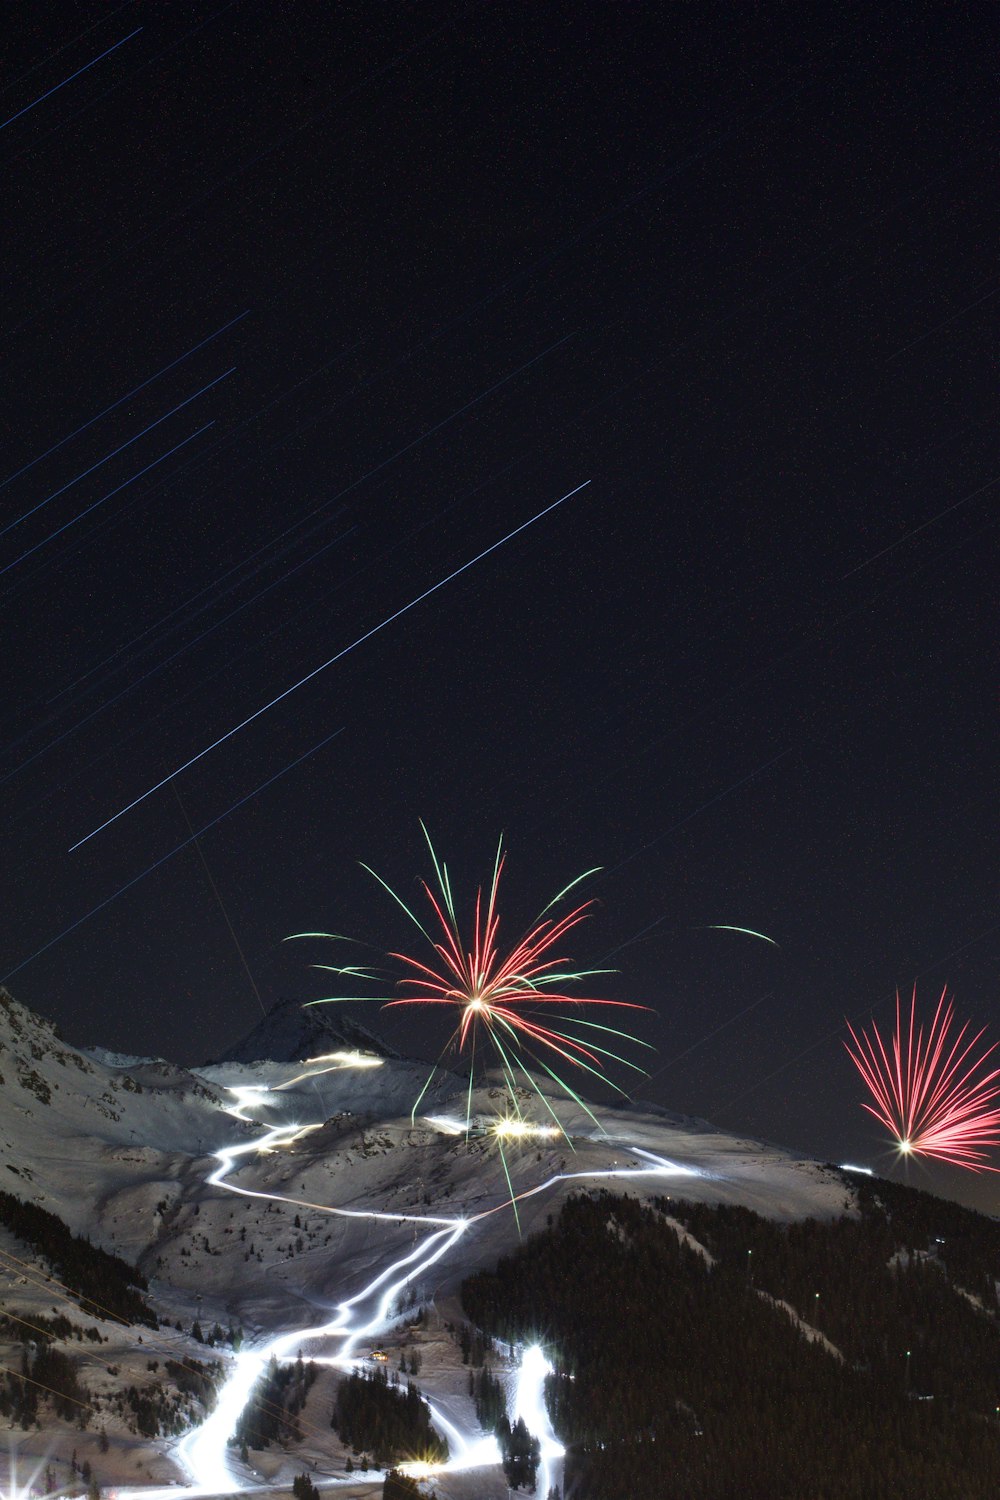 time-lapse photography of exploding fireworks in the sky during nighttime